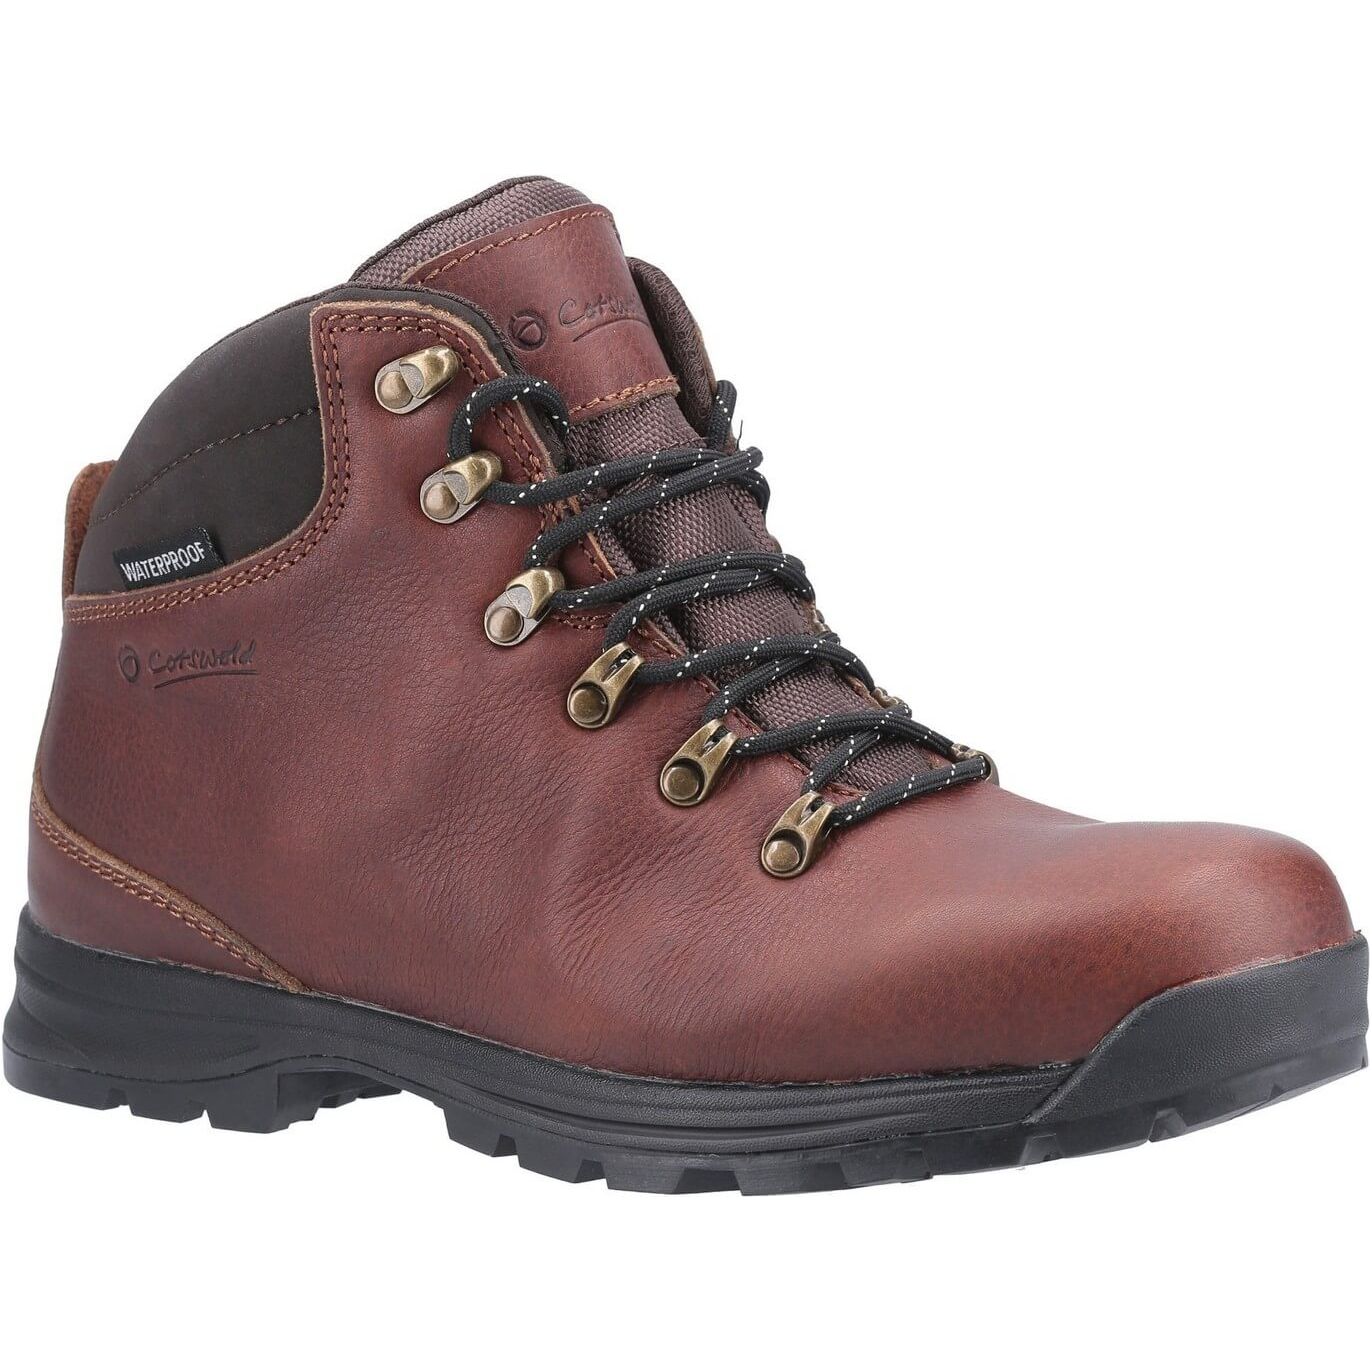 Cotswold Kingsway Hiking shoes-Brown-Main